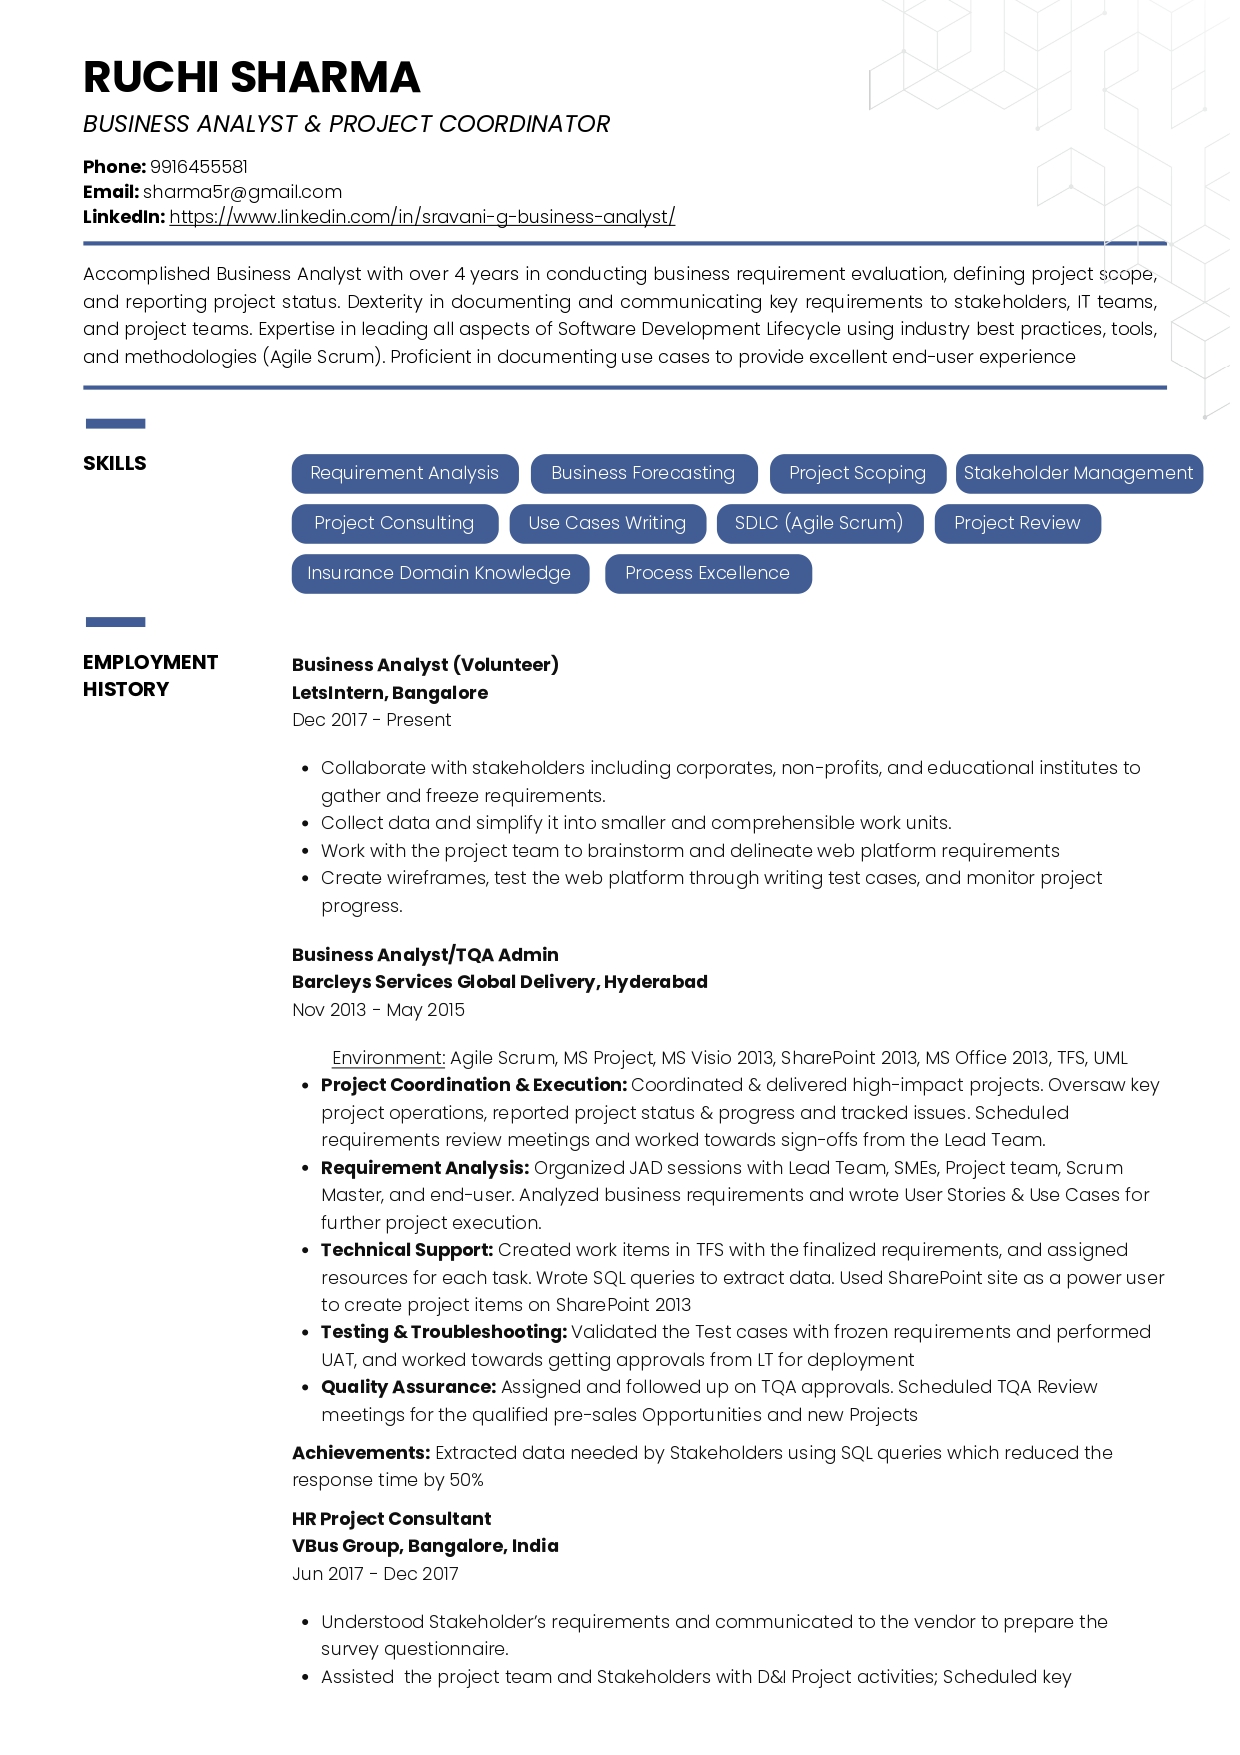 Sample Resume of Business Analyst and Project Coordinator with Career Break | Free Resume Templates & Samples on Resumod.co